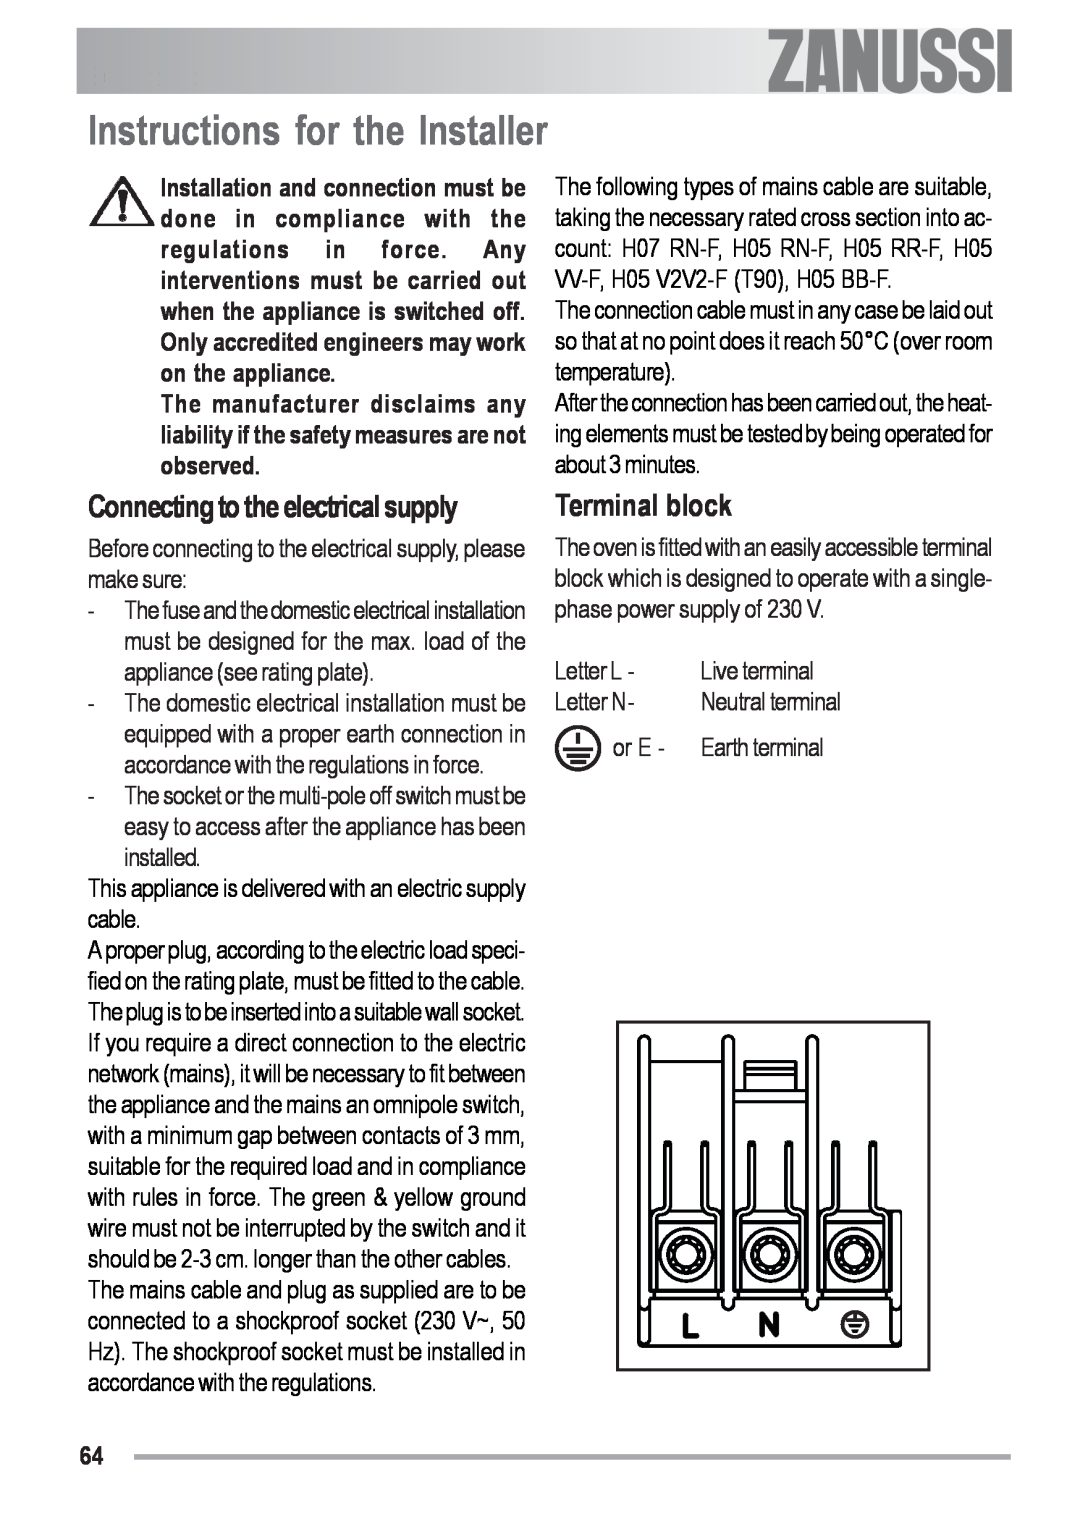 Zanussi ZOB 590 Instructions for the Installer, Terminal block, electrolux, Connecting to the electrical supply, installed 